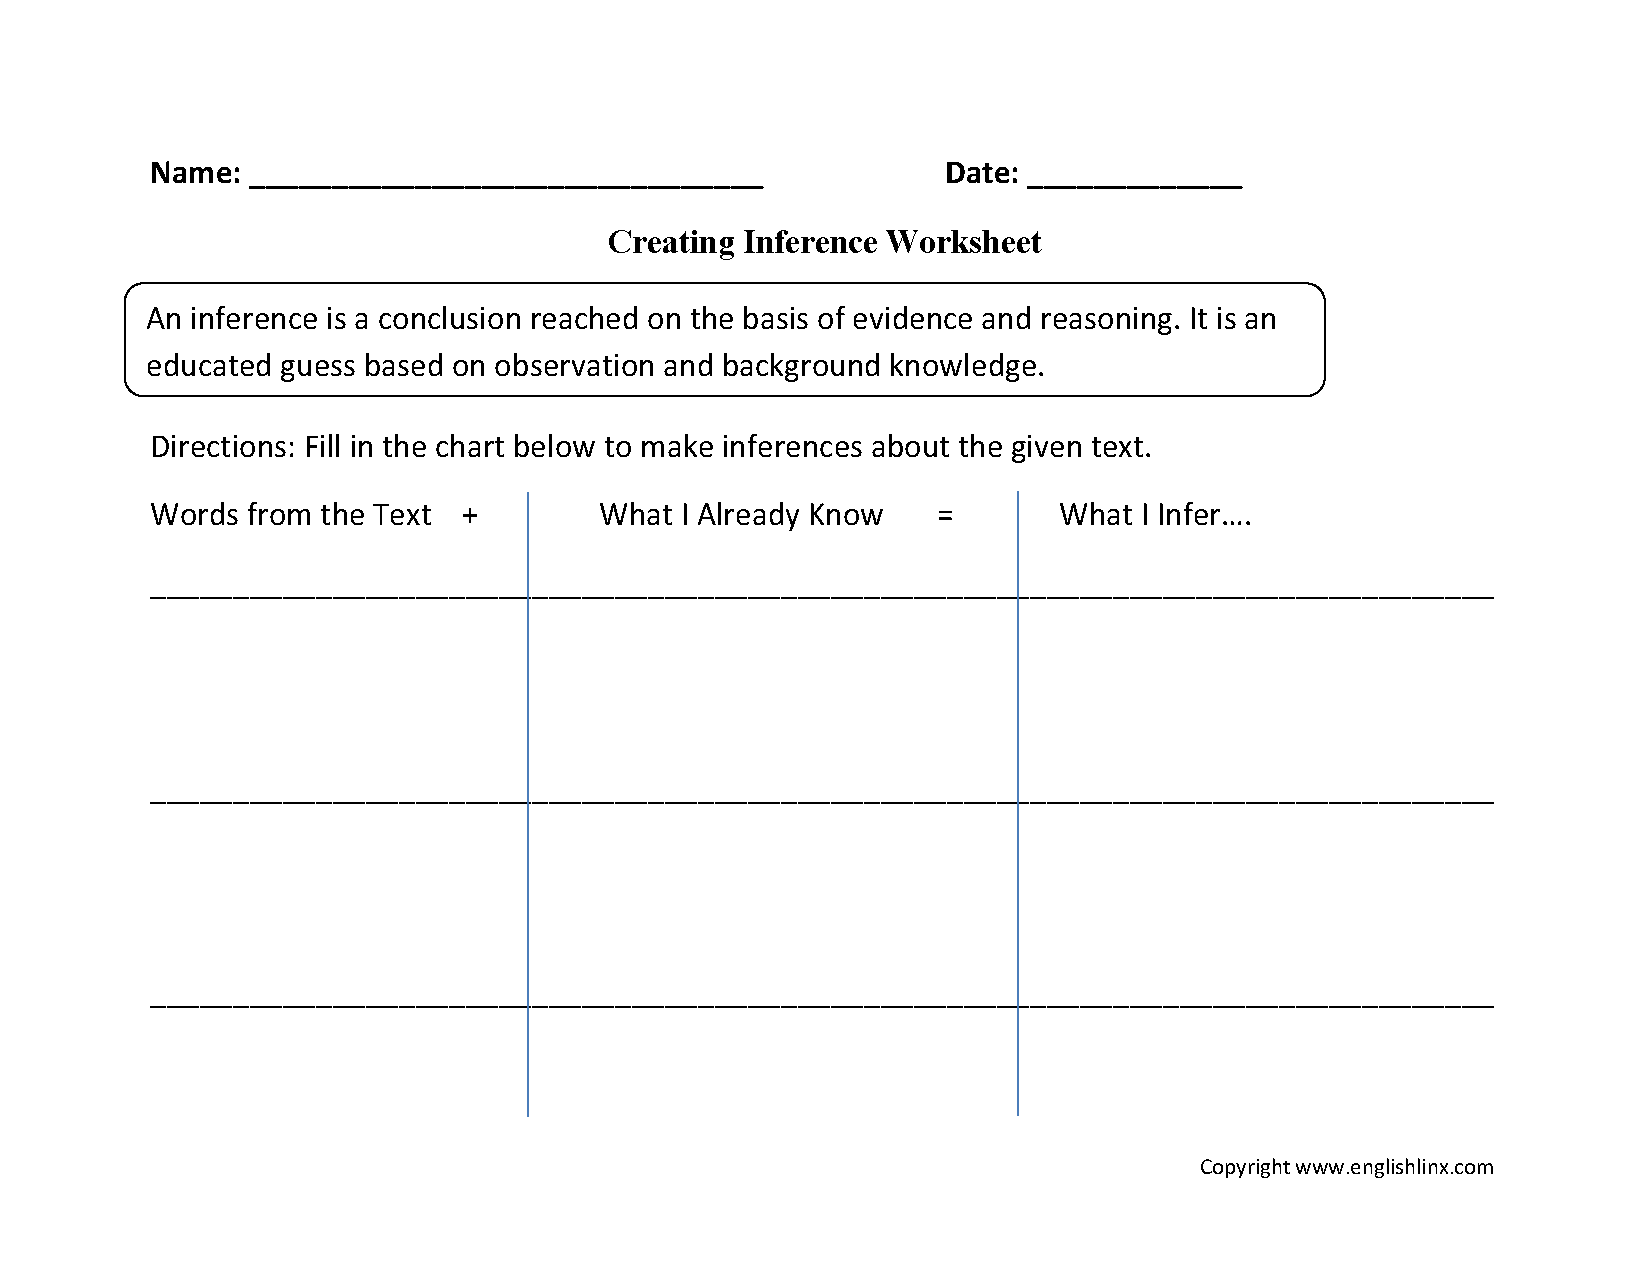 14-best-images-of-making-inferences-worksheets-7th-grade-5th-grade-inference-graphic-organizer